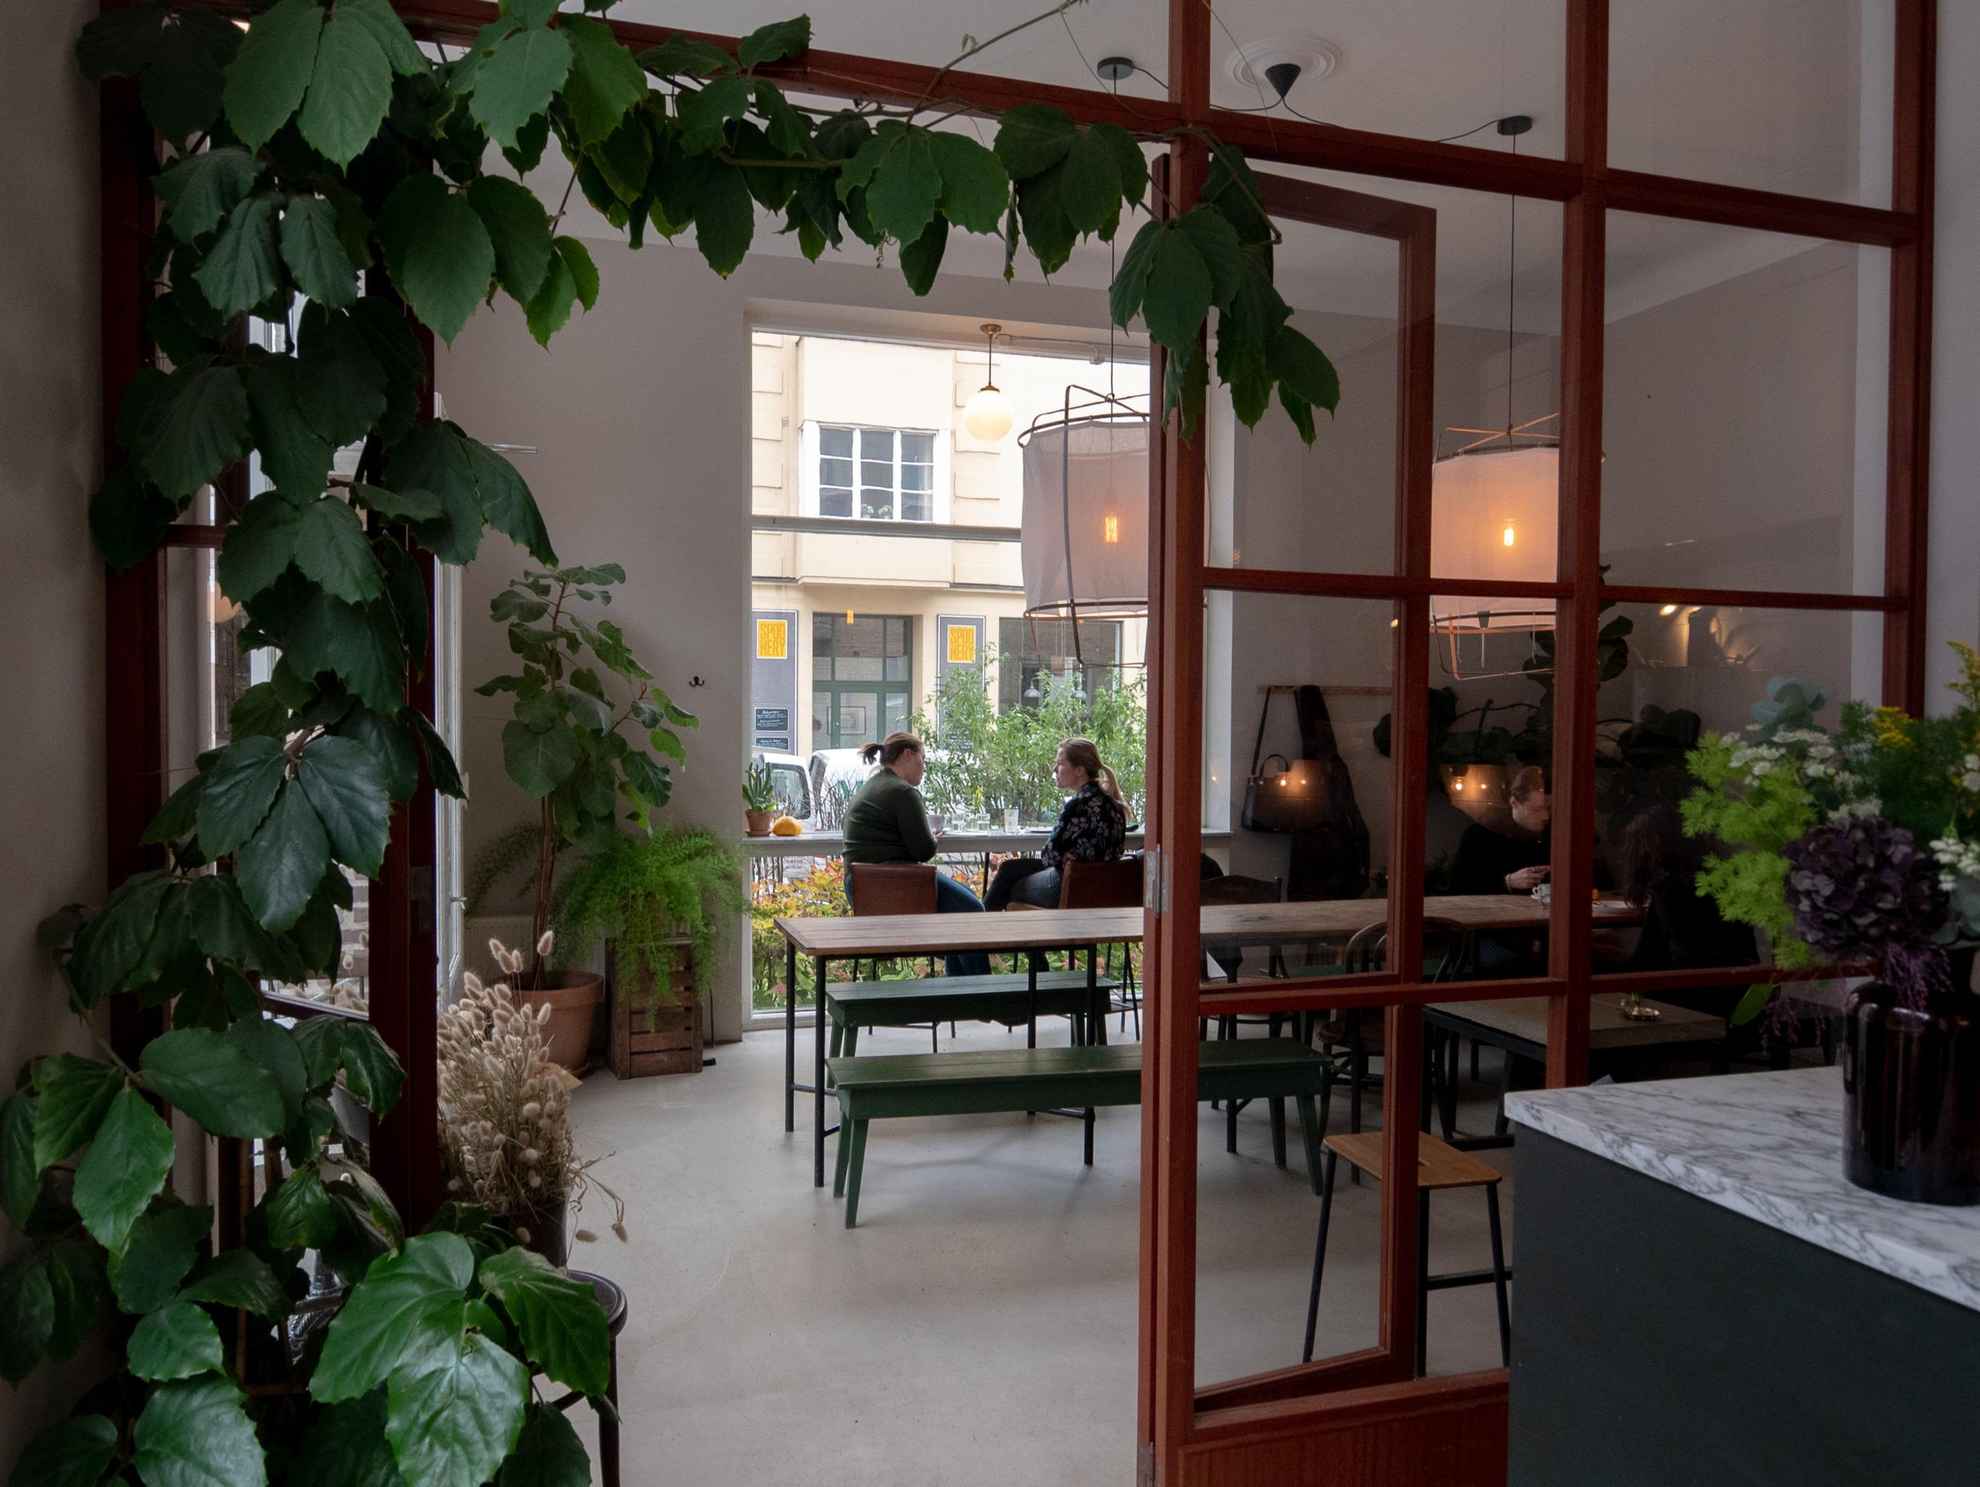 Inside a coffee shop. A room behind a glass wall with an open door. A long table with chairs and two big lamps in the middle of the room. Two girls sit by the window at the end of the room. A plant climbing the opening of the wall.